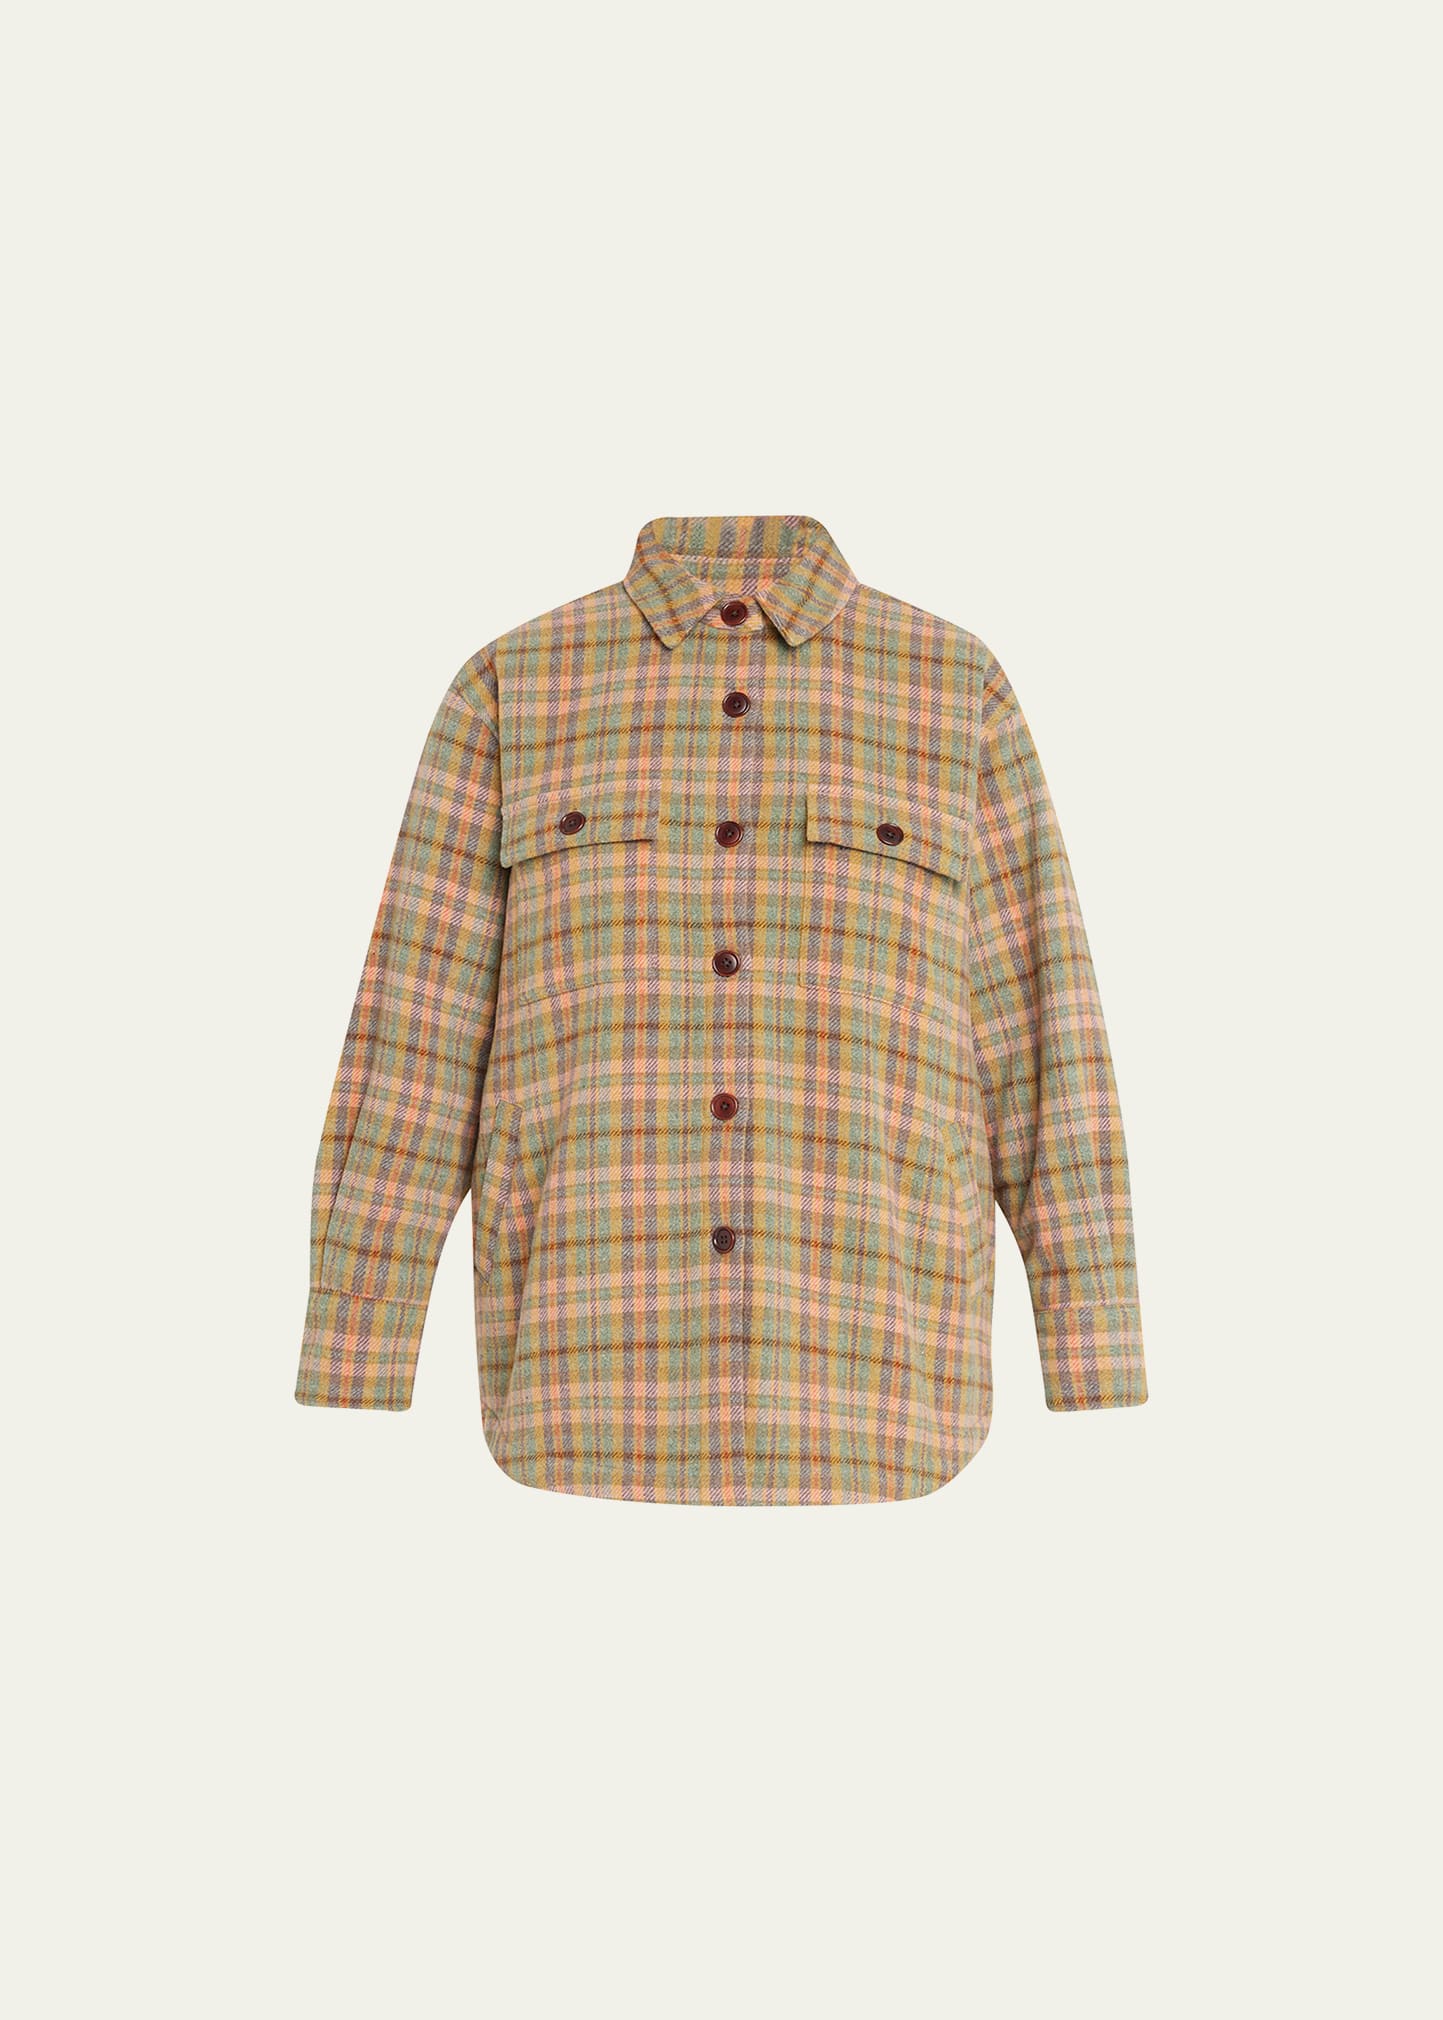 THE GREAT THE STATE PARK SHIRT JACKET